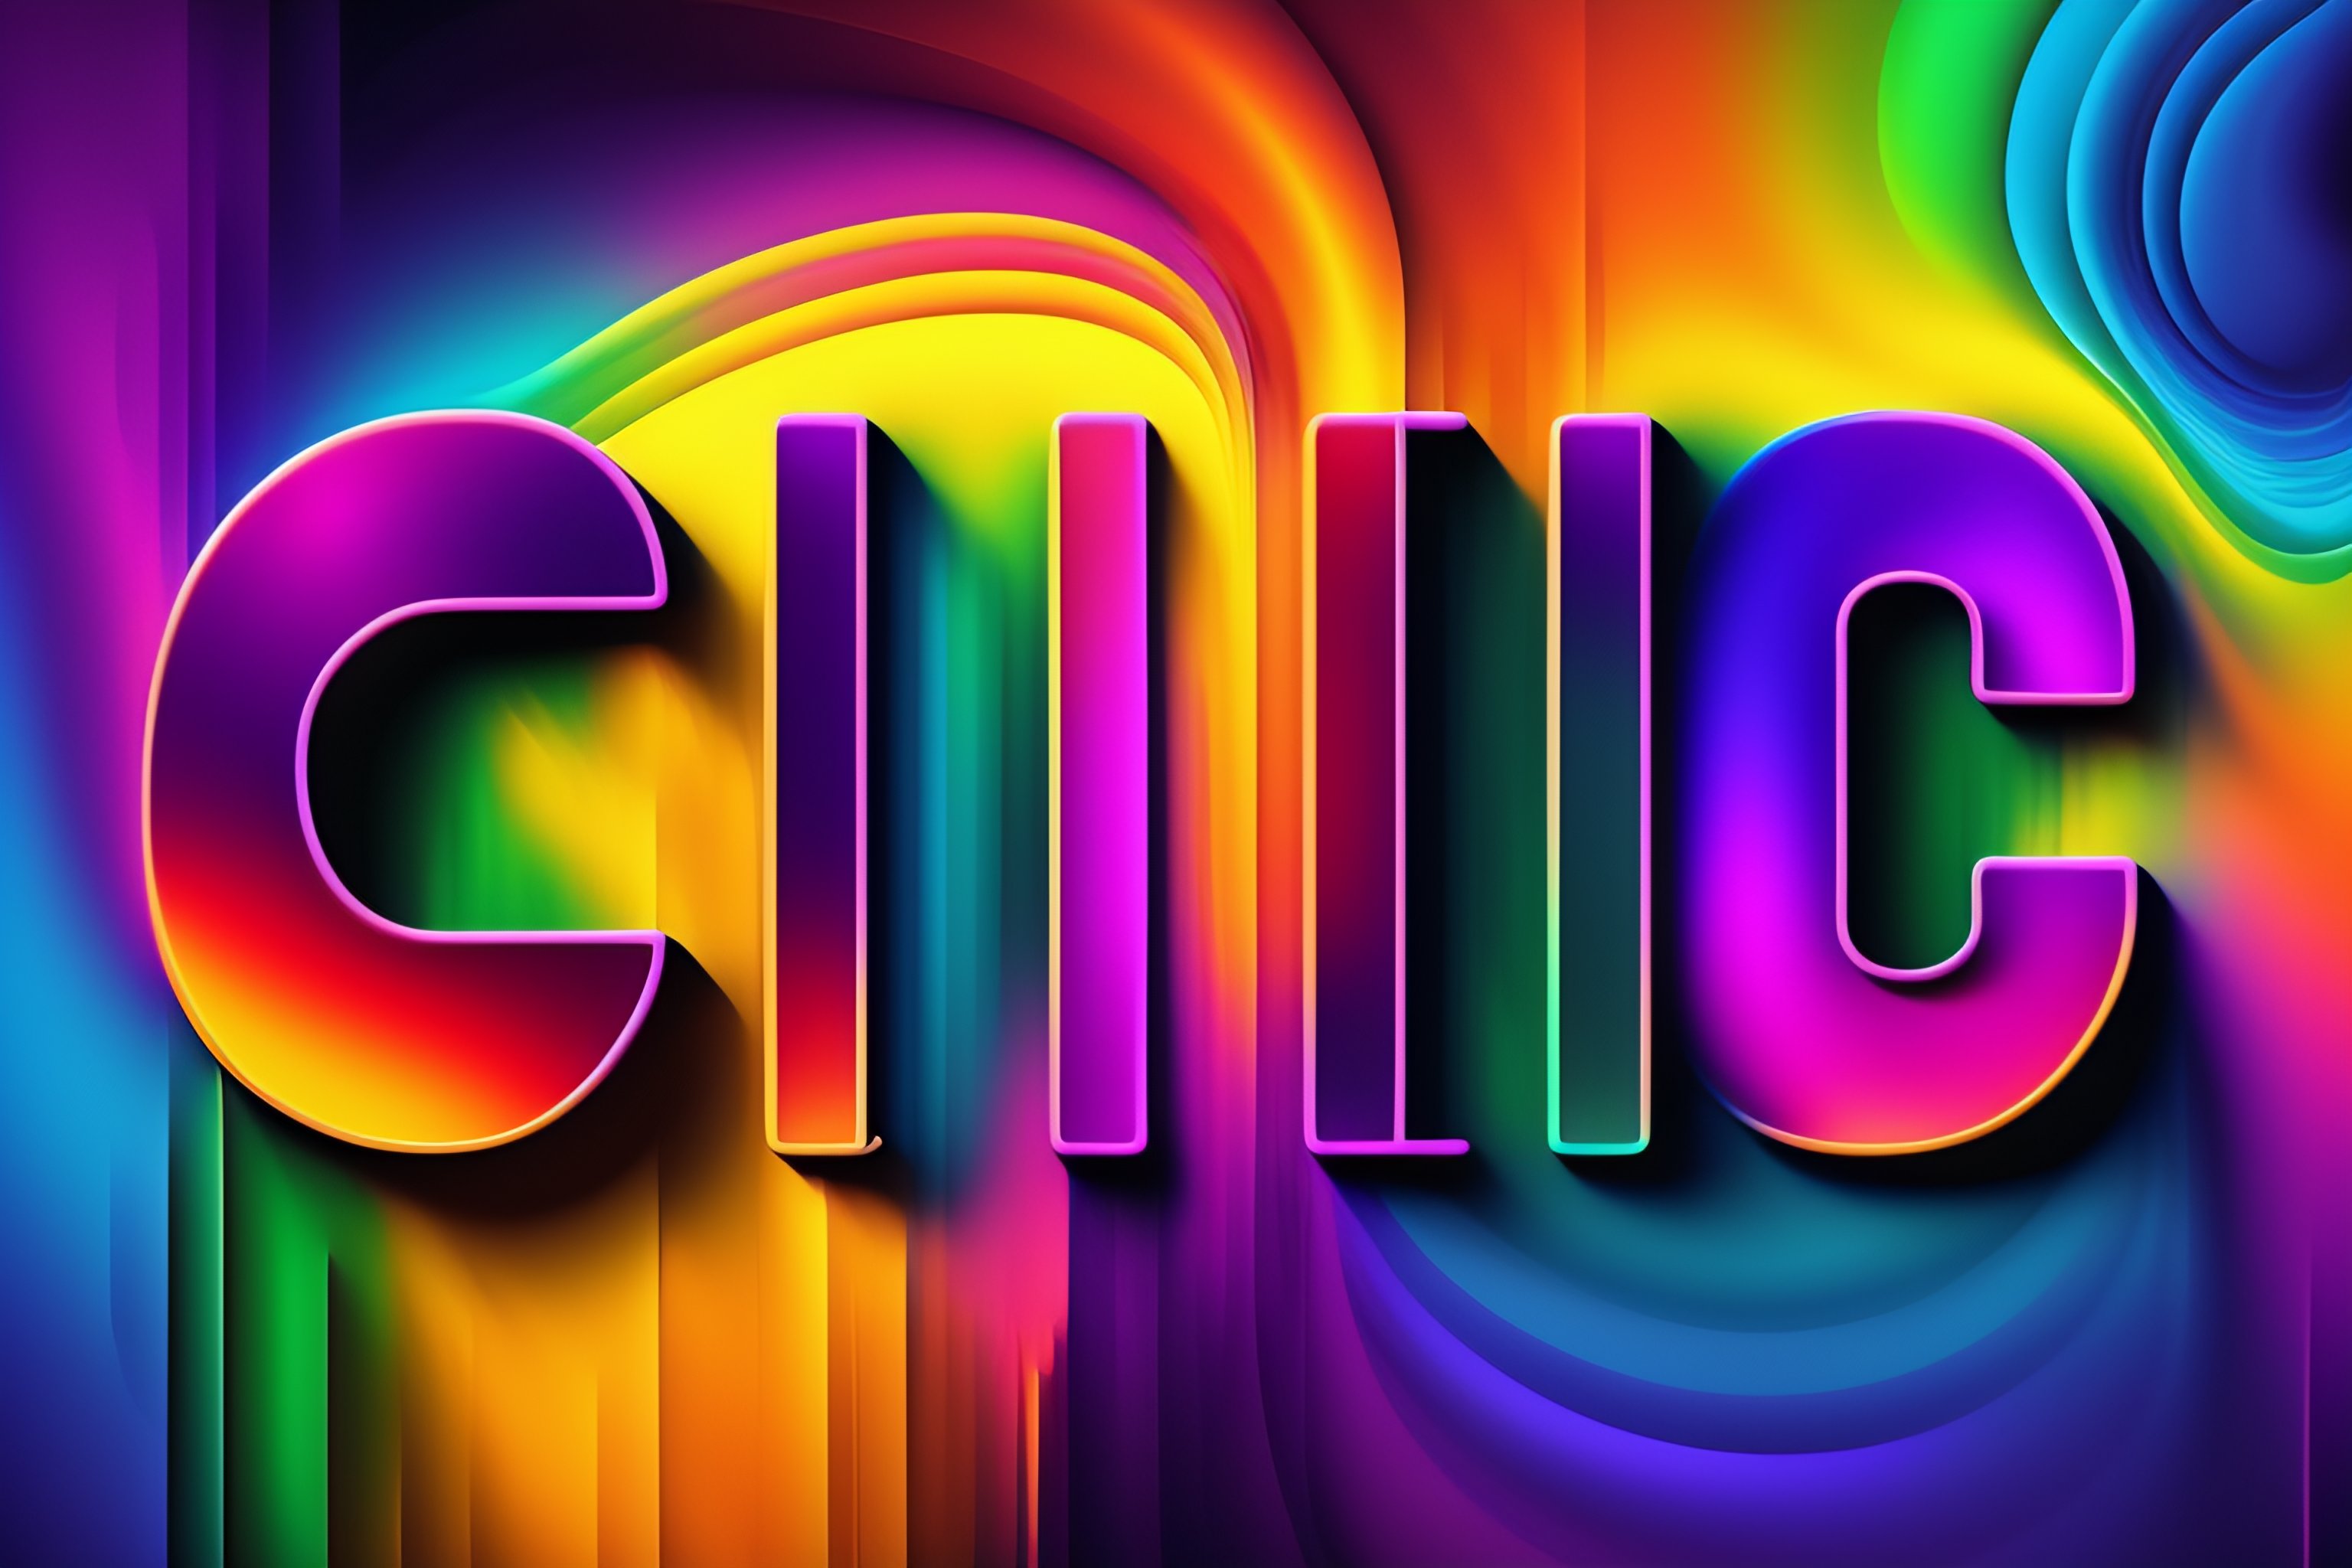 lexica-new-york-in-capital-letters-with-psychedelic-colors